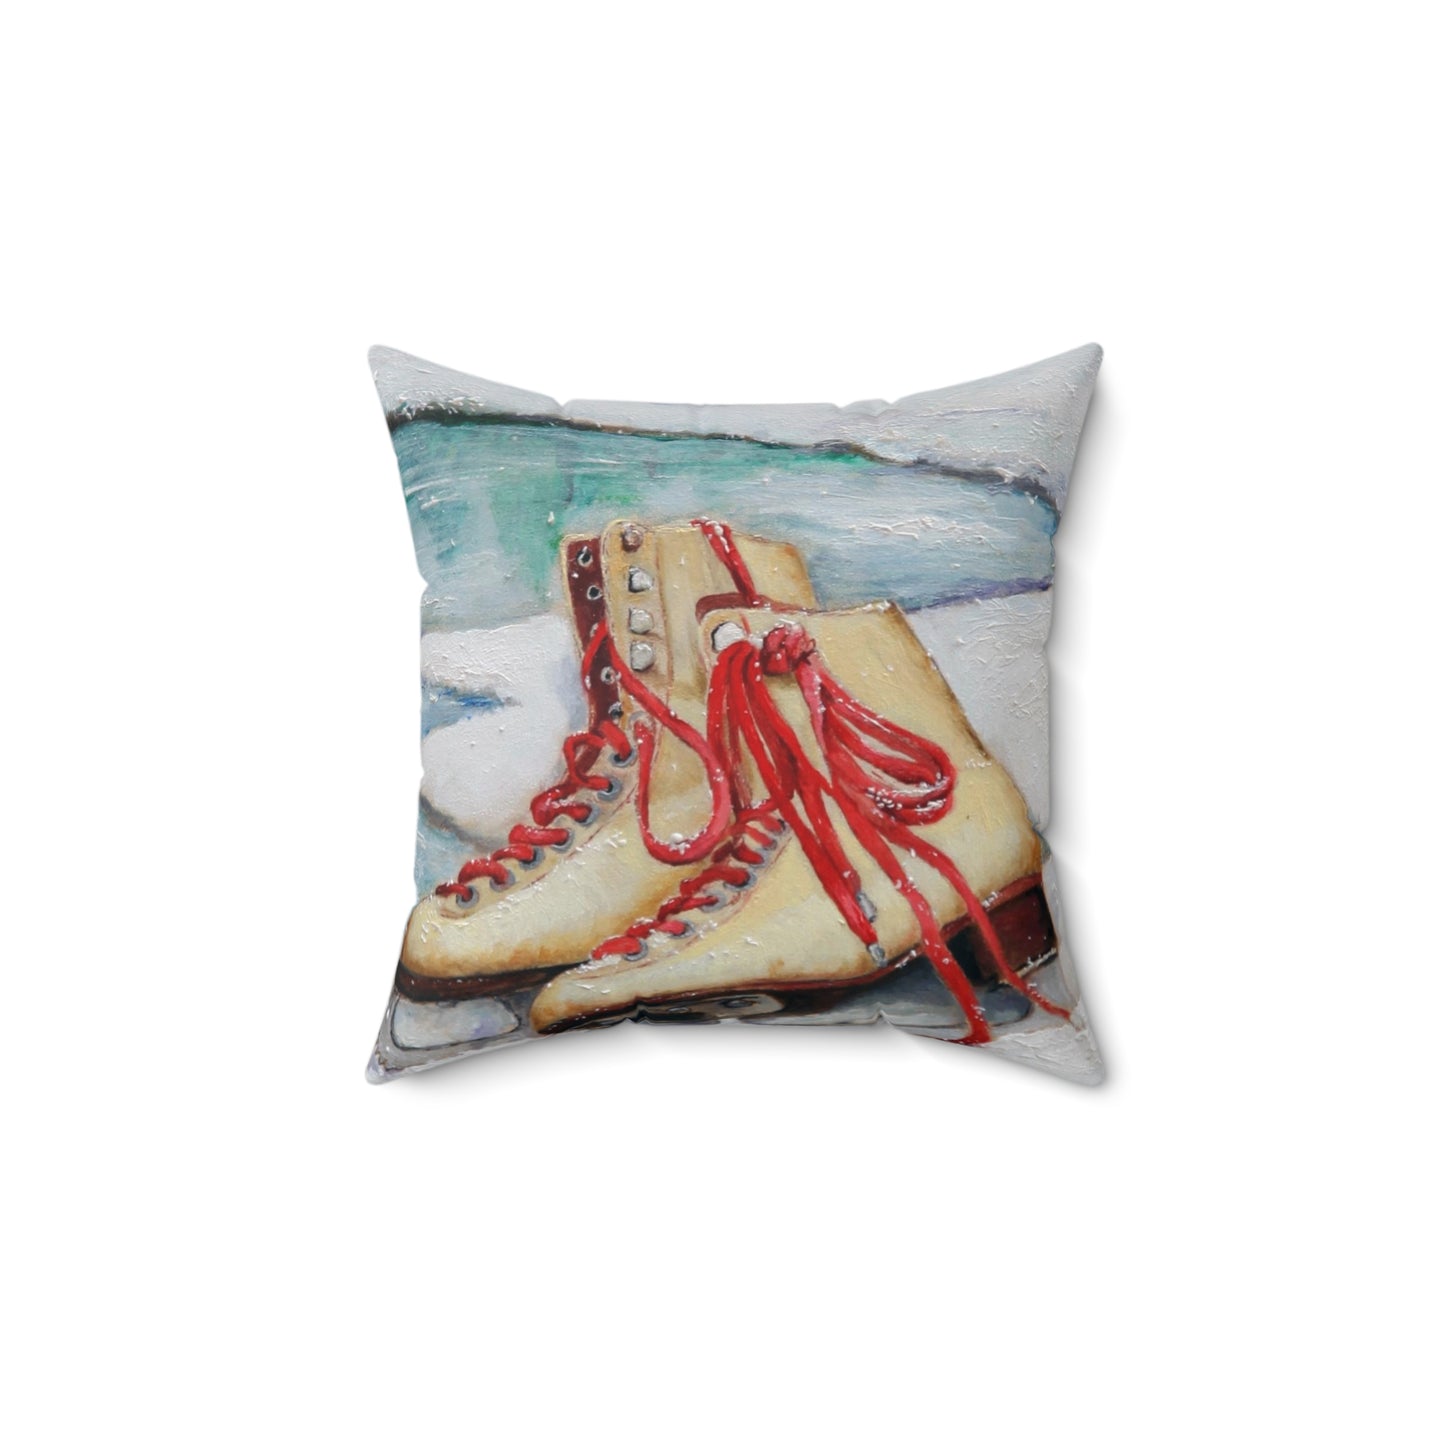 Pillow with Ice Skates Design -  Spun Polyester Square Throw Pillow with Insert